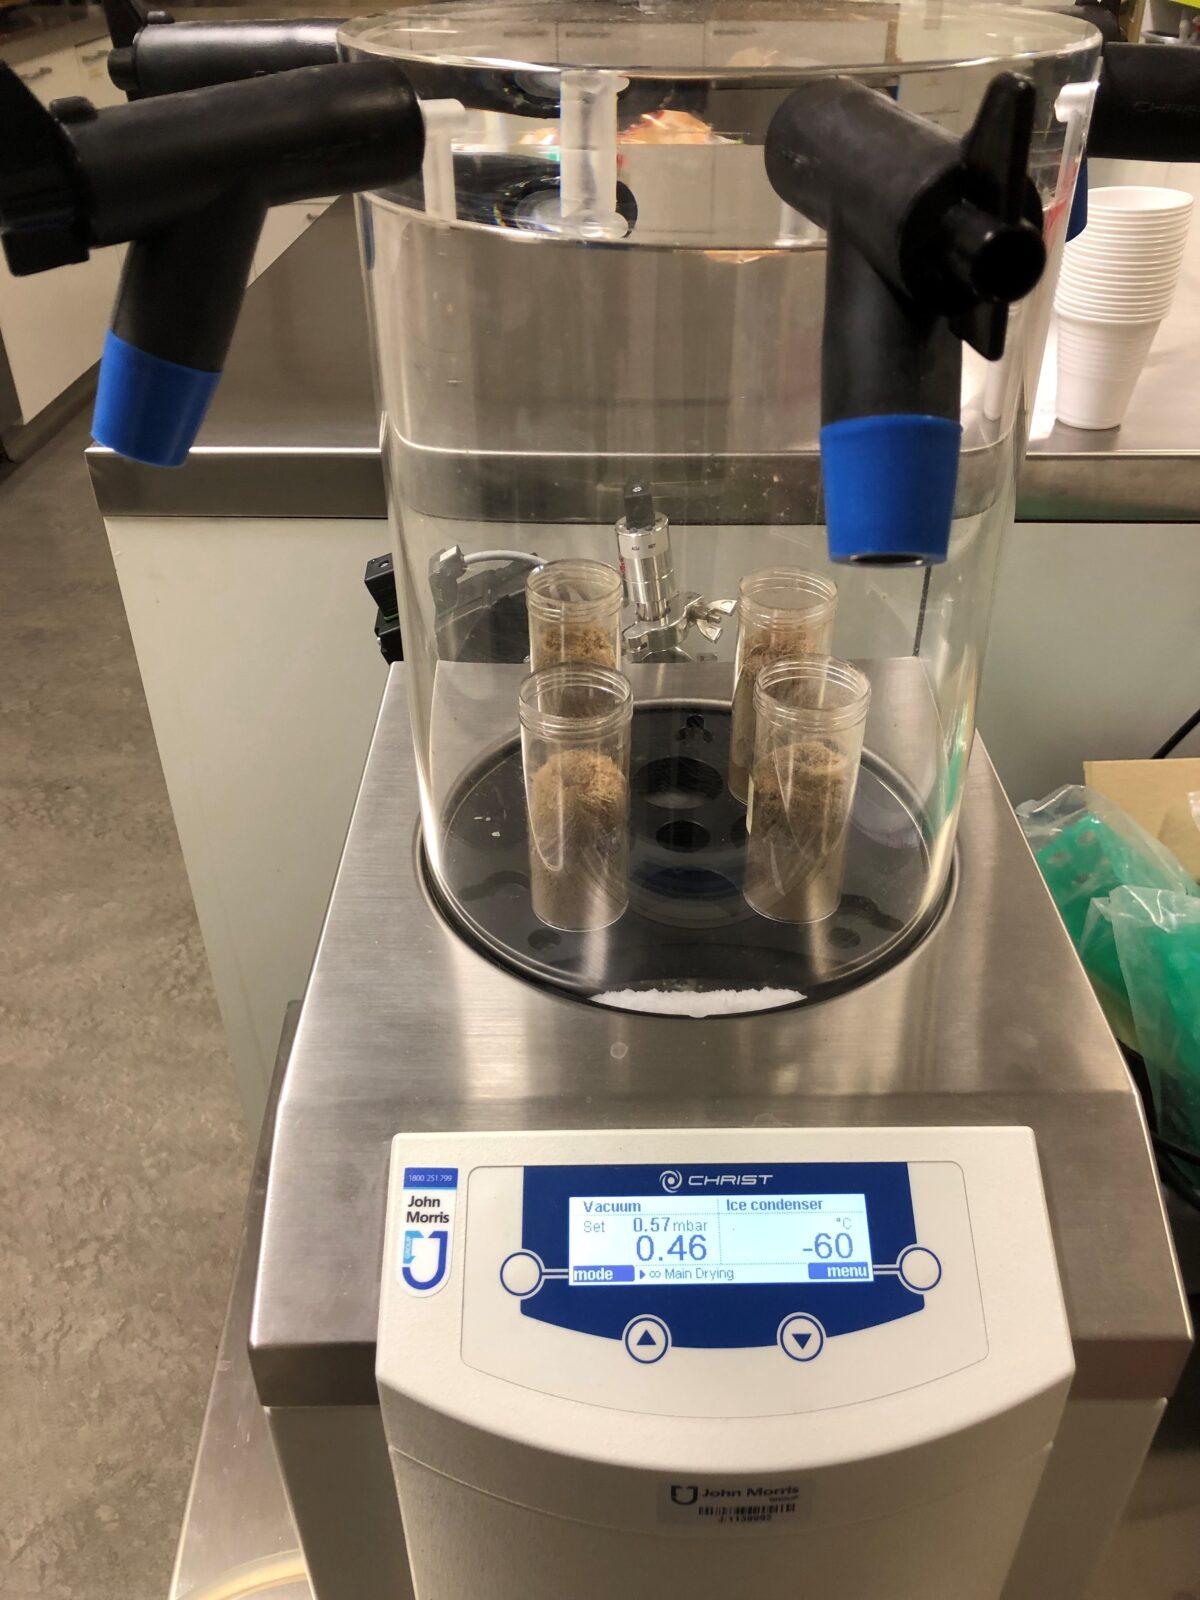 Sea cucumber extract being dried. (University of South Australia)